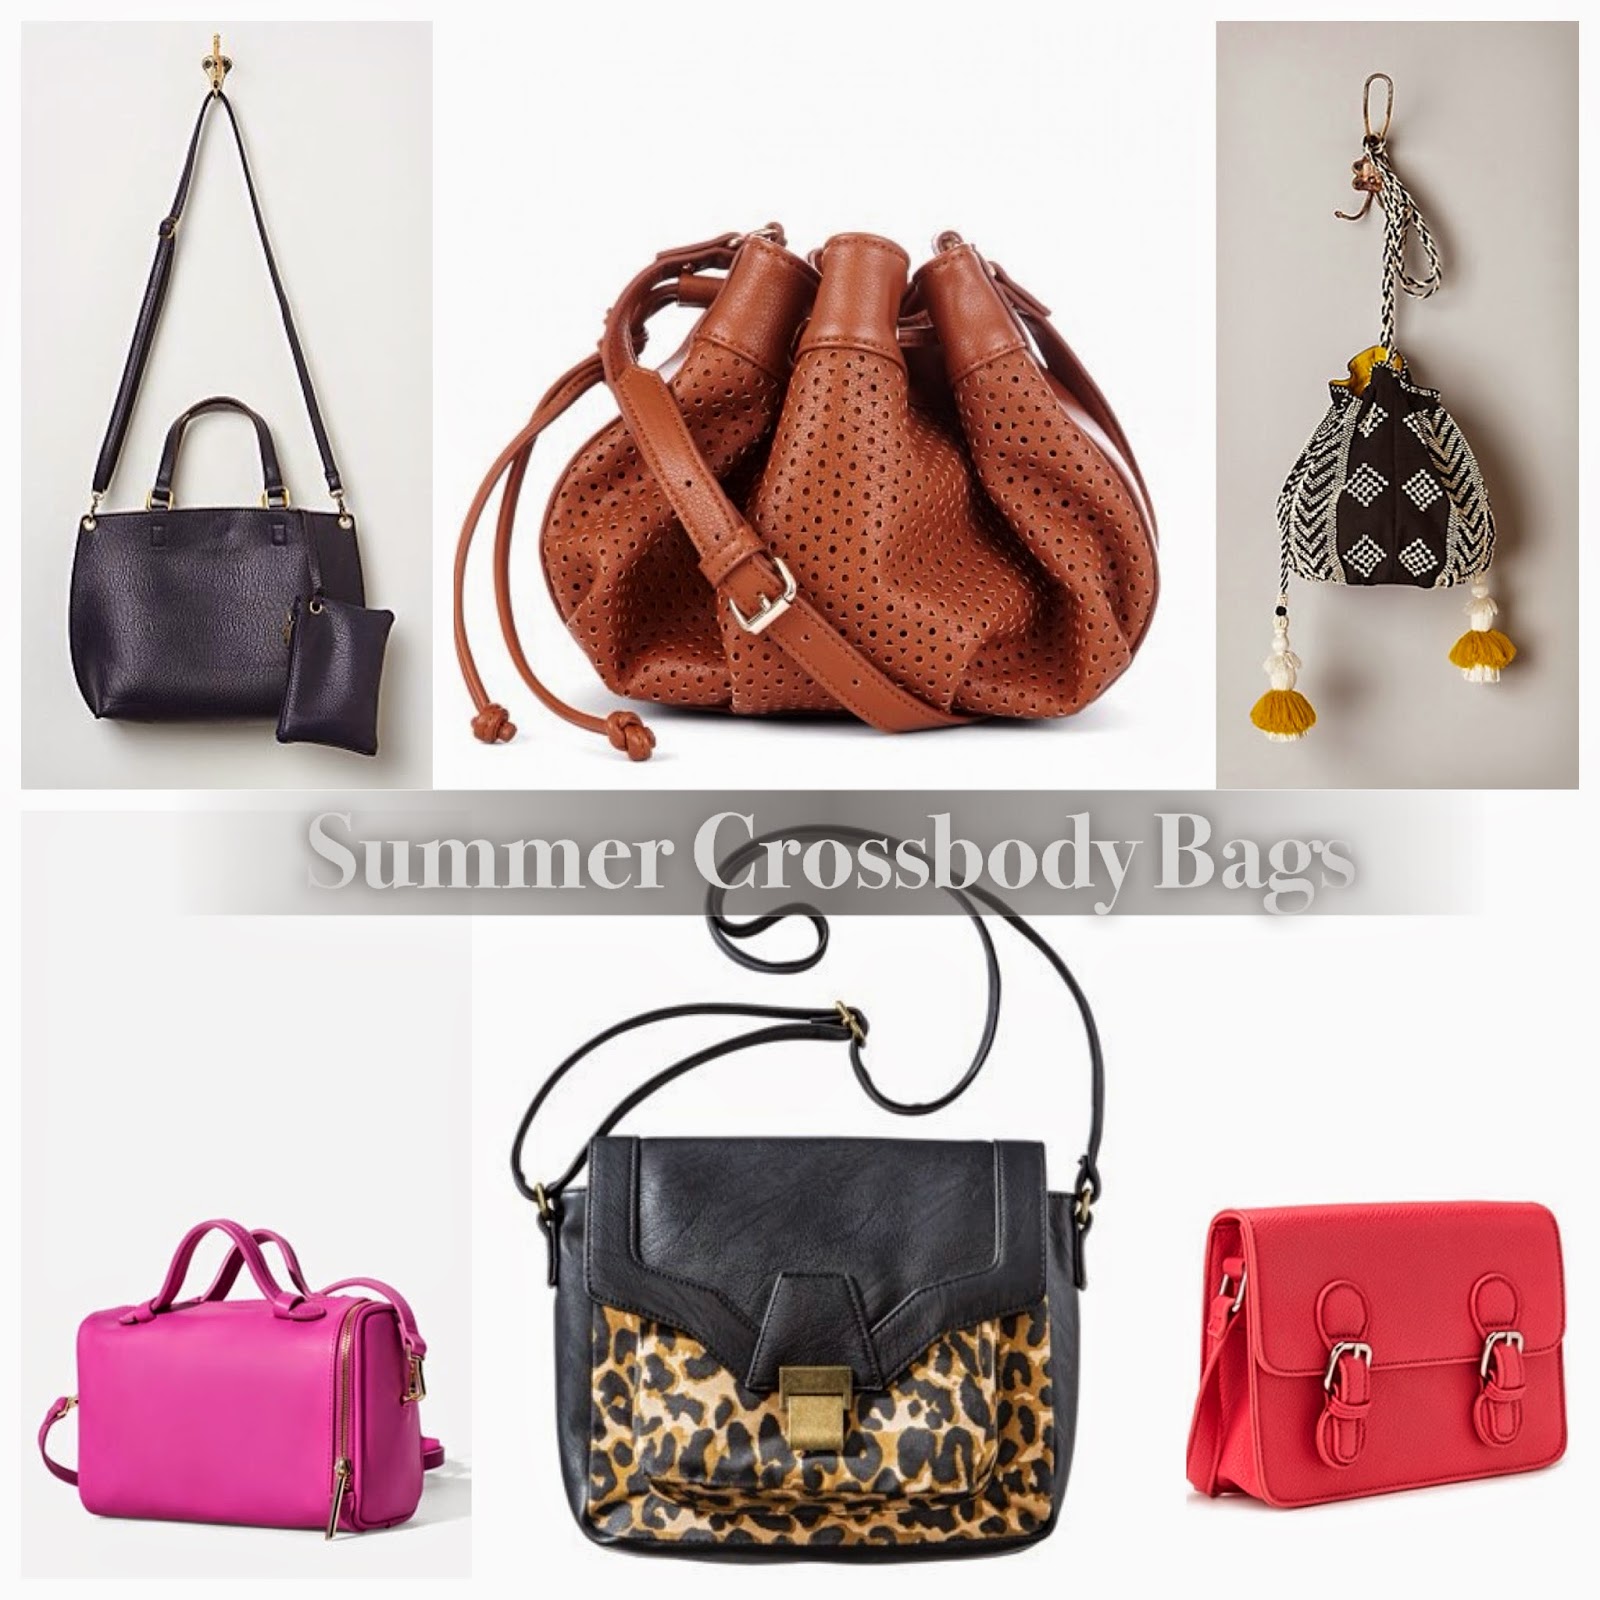 Quirky At Large: Affordable Crossbody Bags for the Summer